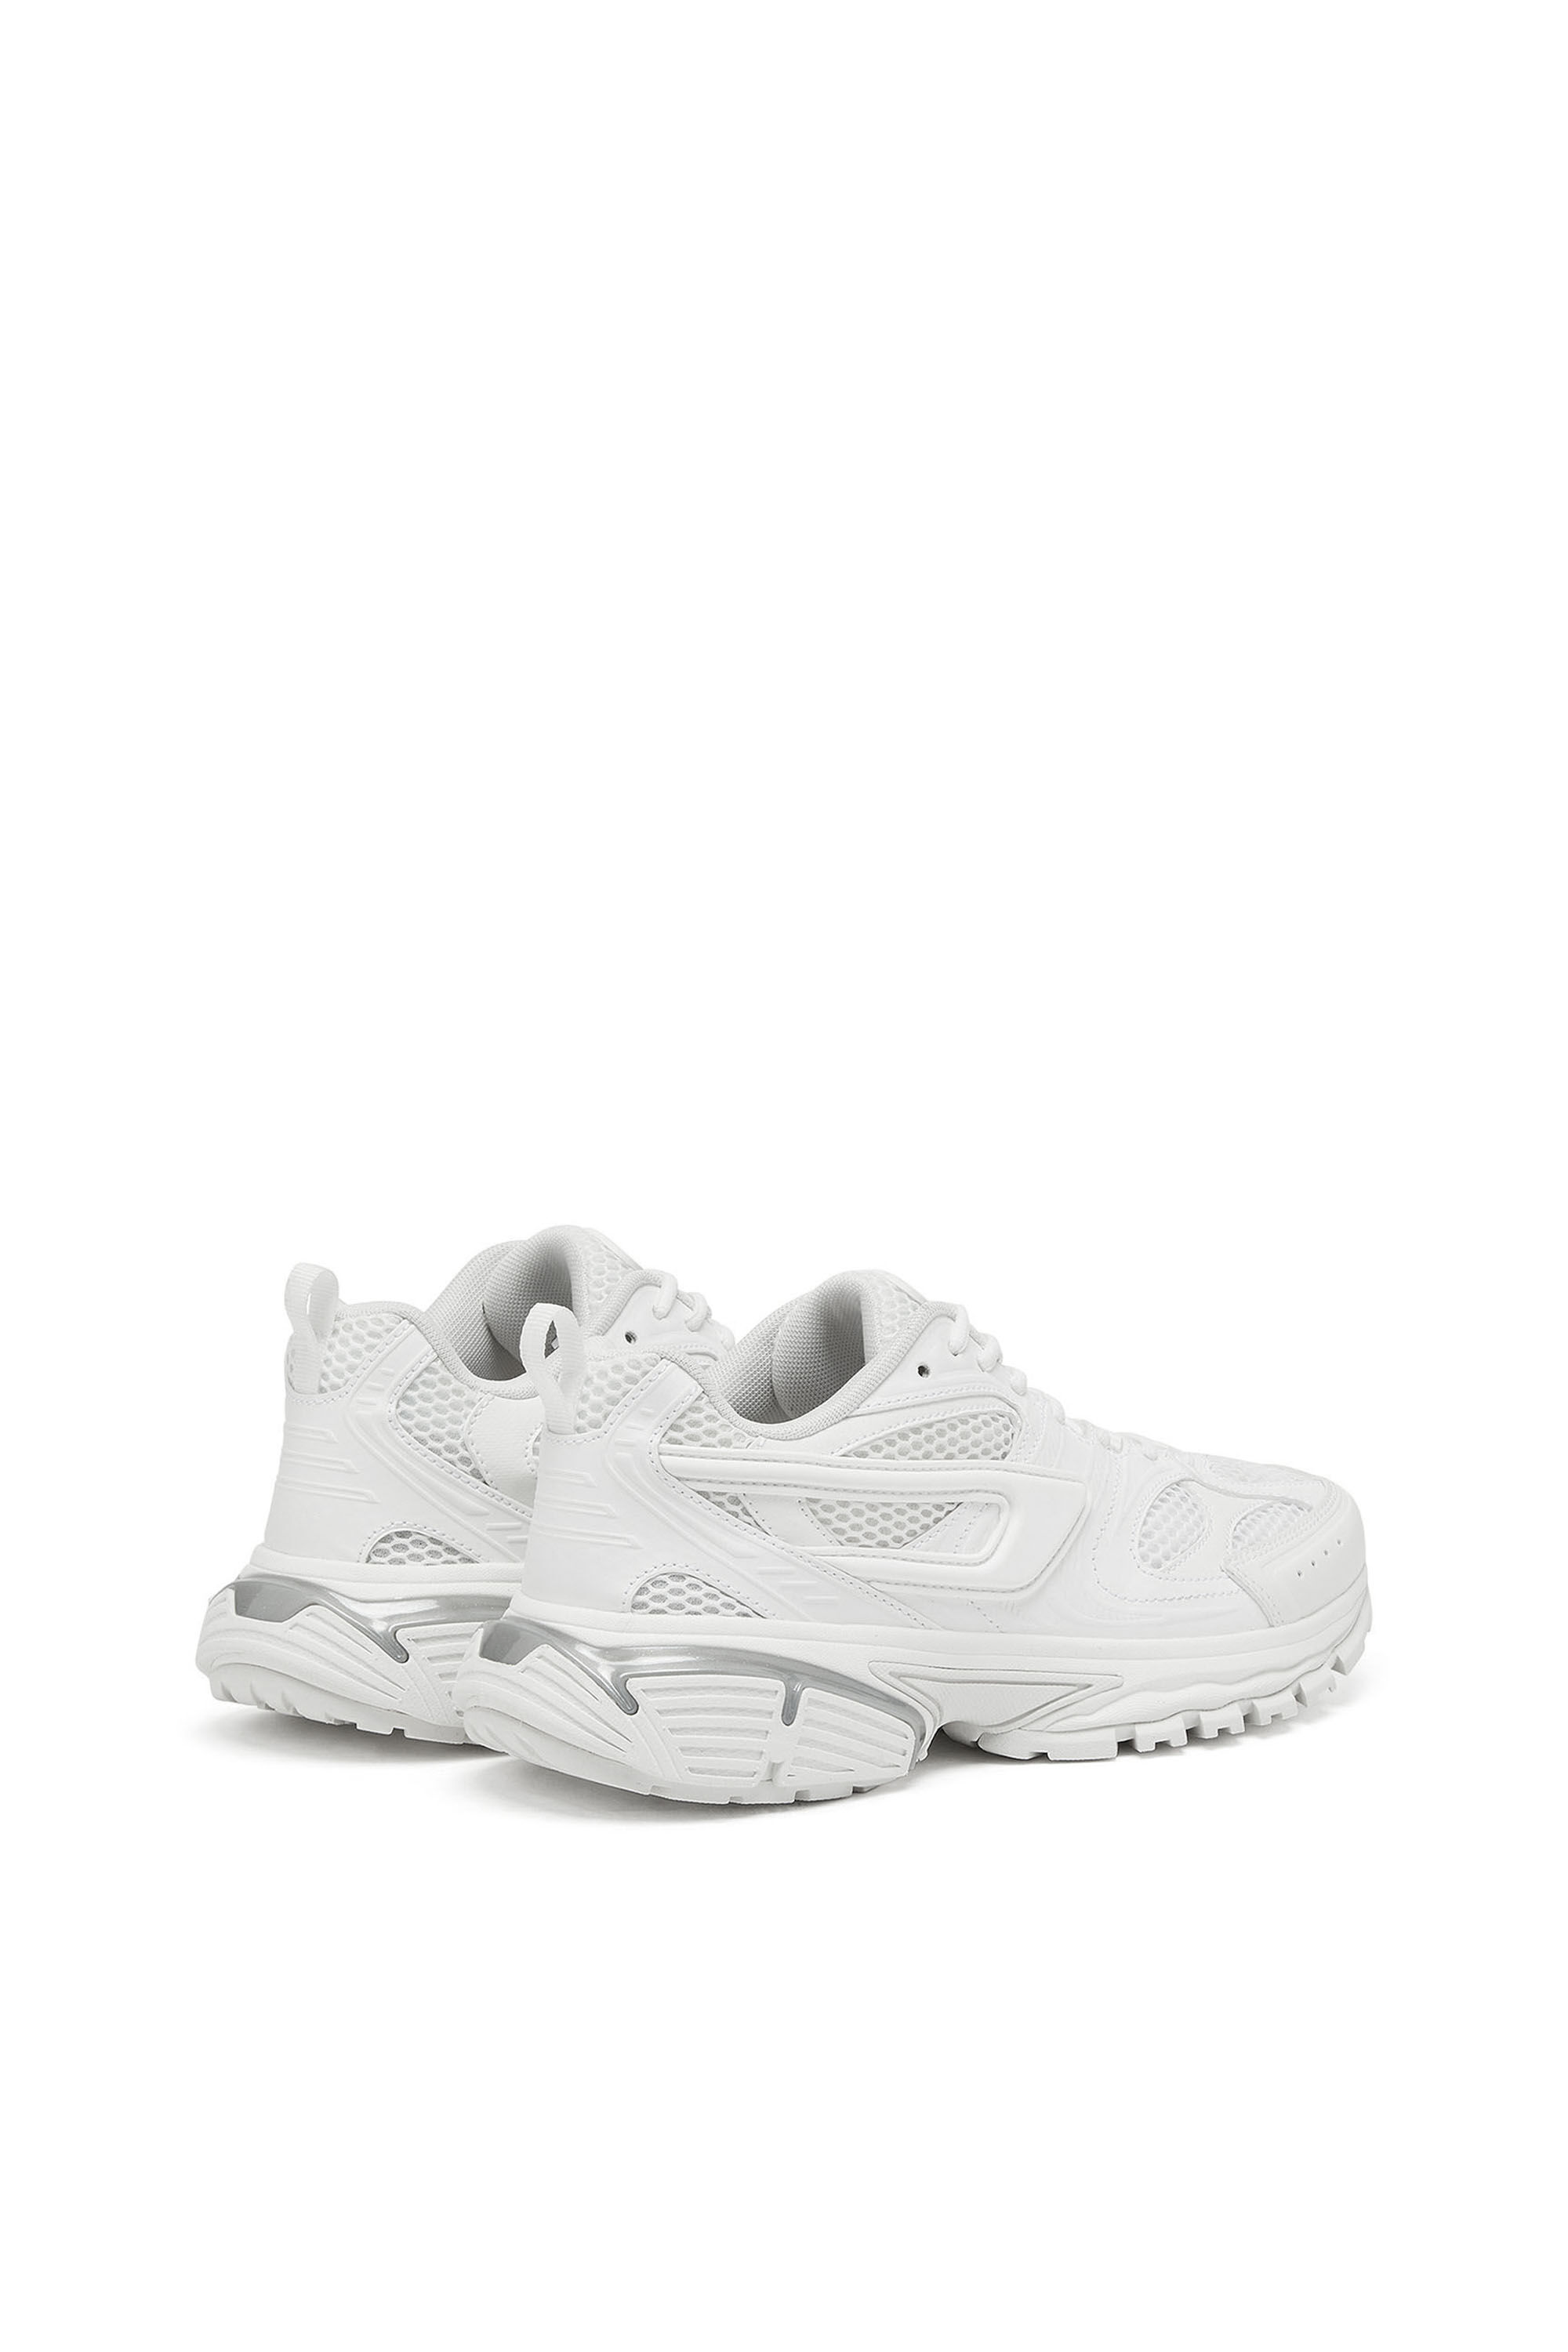 Diesel - S-SERENDIPITY PRO-X1, Man S-Serendipity-Monochrome sneakers in mesh and PU in White - Image 3